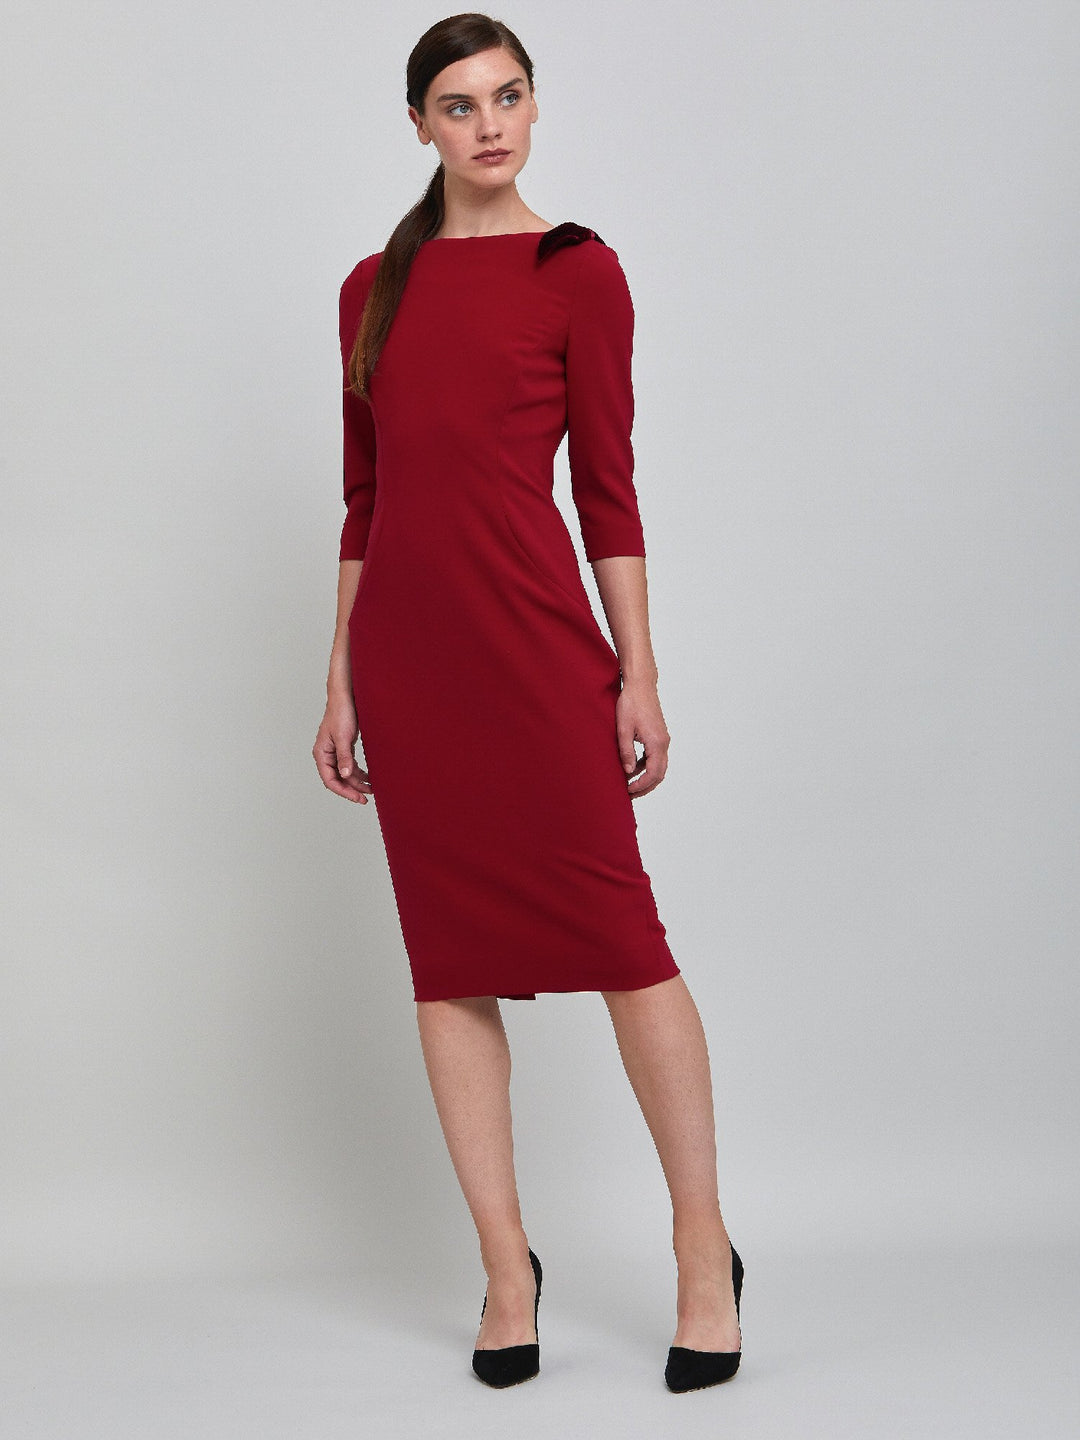 Natara, the perfect occasion dress. Crafted in a tricotine fabric with a hint of stretch. A body-skimming silhouette with slash neck, velvet bow detail and a pencil skirt the dress falls to mid-calf. Wear her out to cocktails with the girls, date night or a special winter wedding!